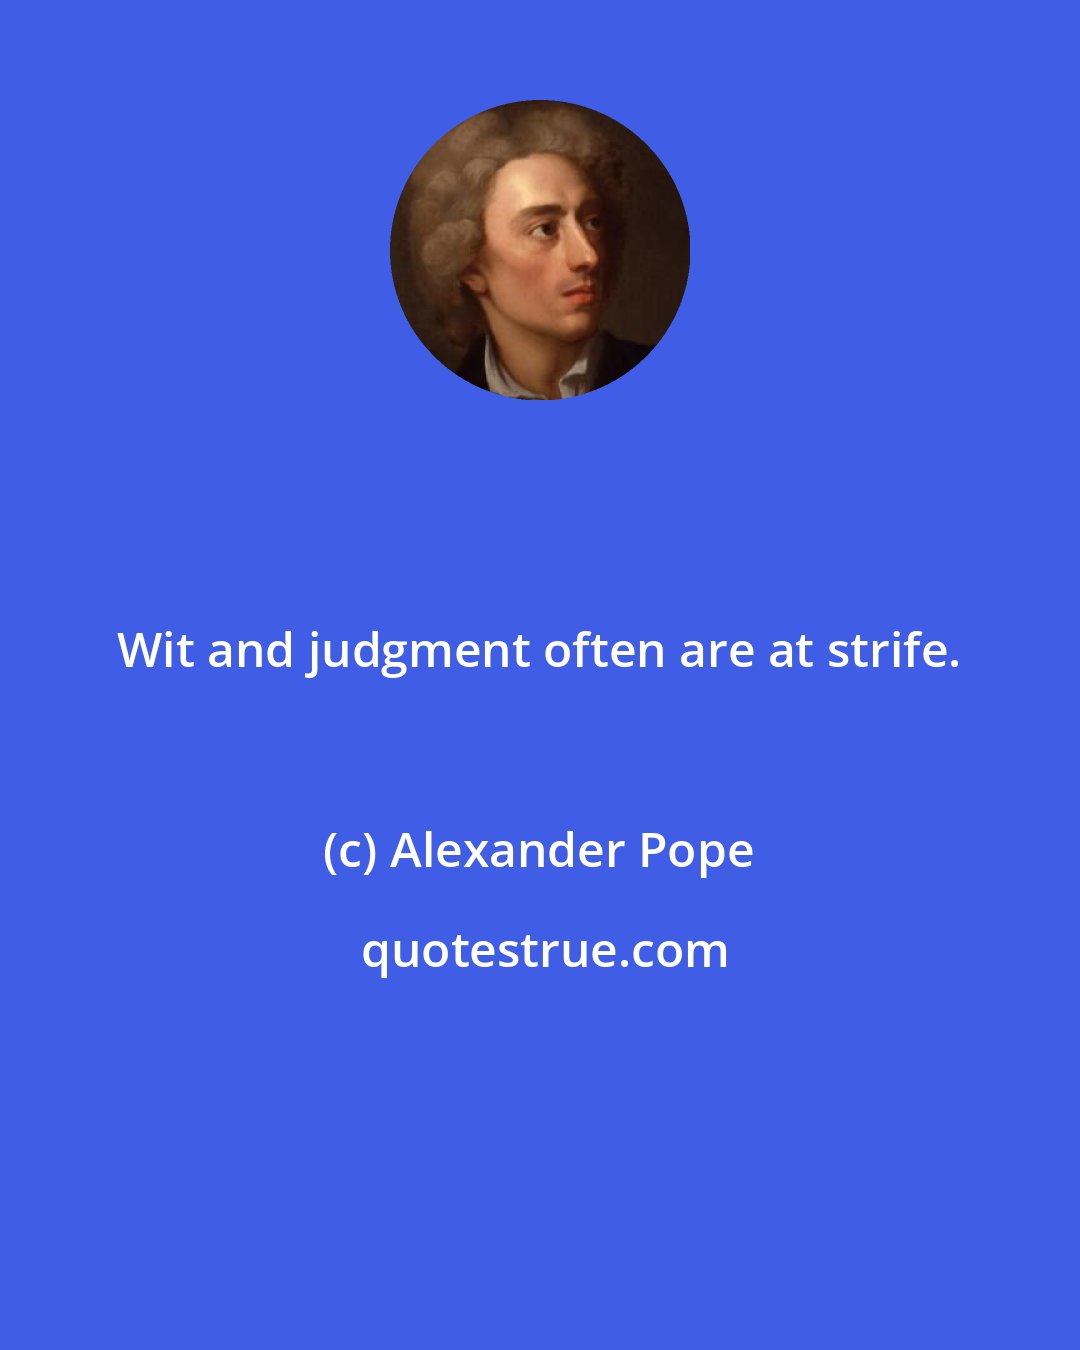 Alexander Pope: Wit and judgment often are at strife.